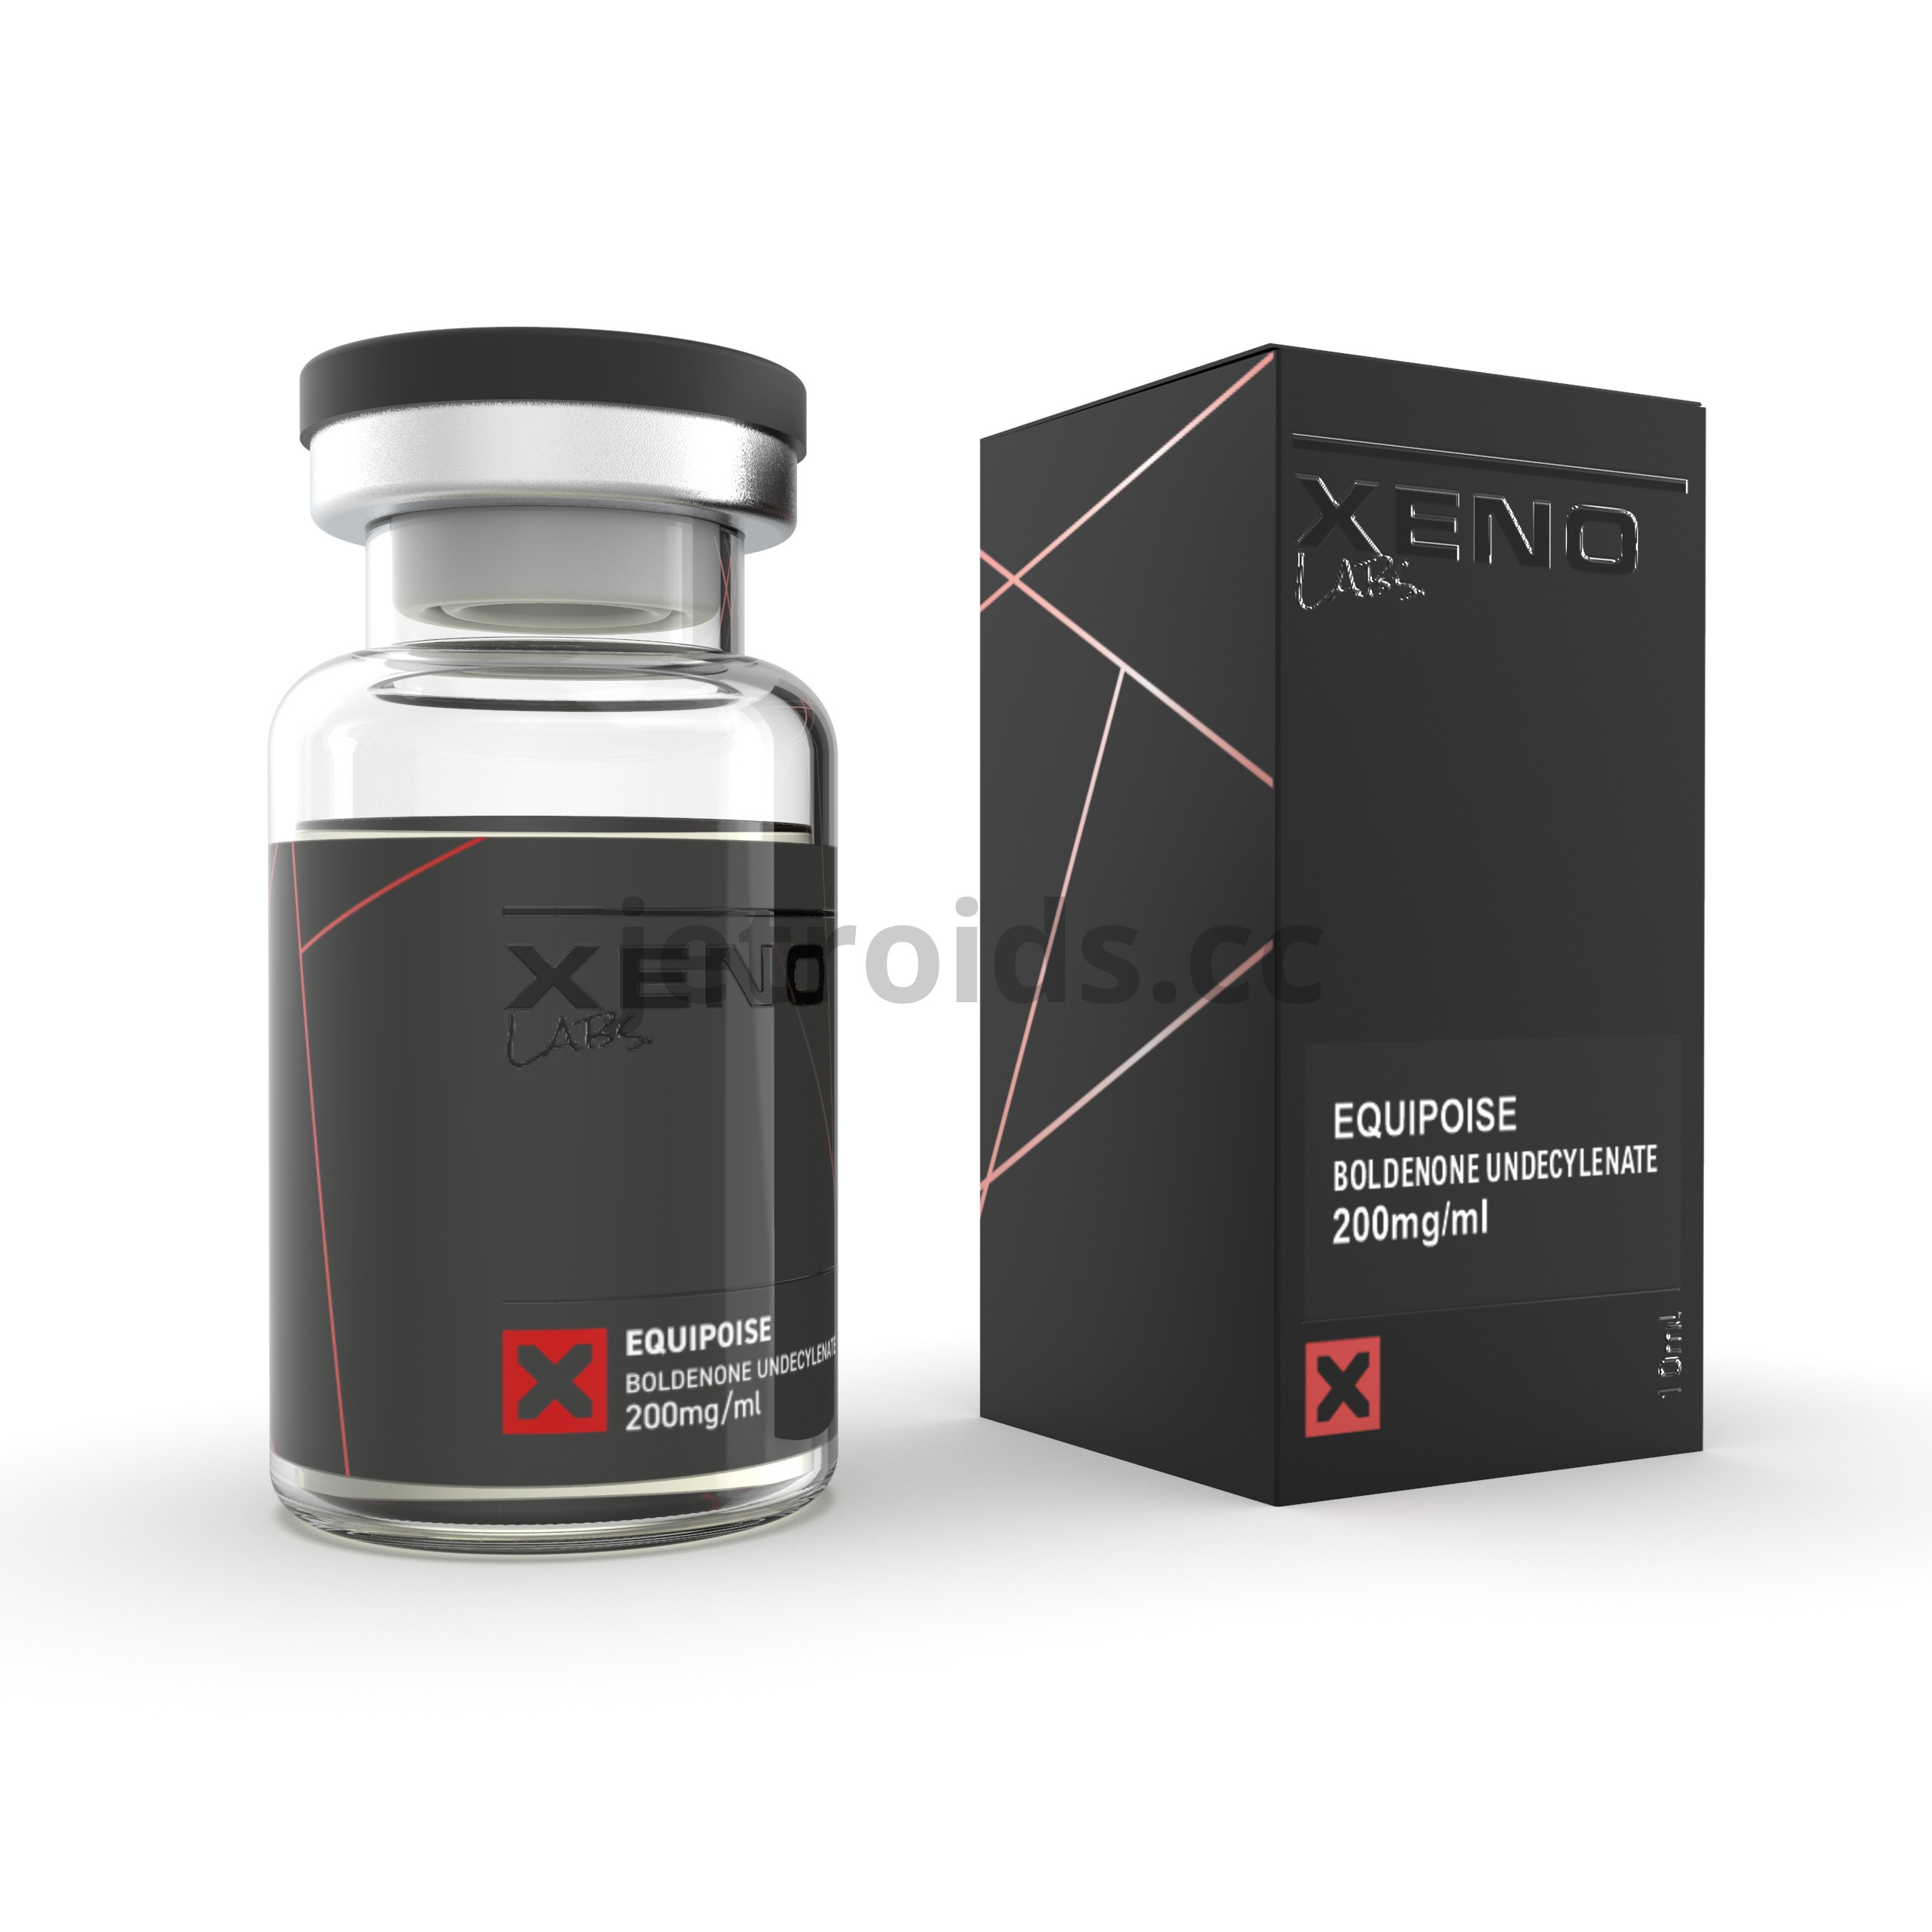 Xeno Labs - US Equipoise - Boldenone Undeclynate 200 Product Info